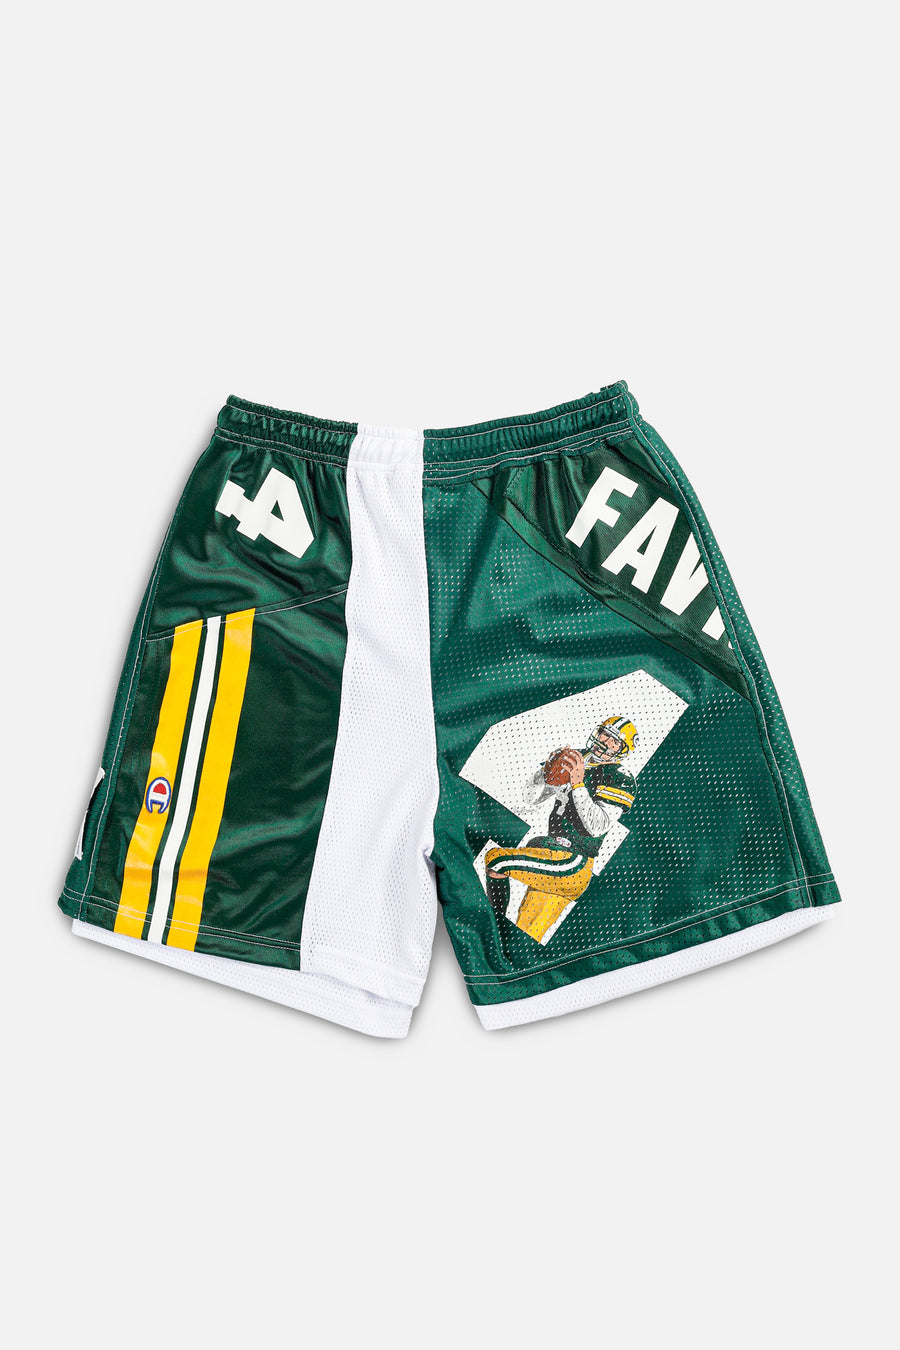 Unisex Rework Green Bay Packers NFL Jersey Shorts - L